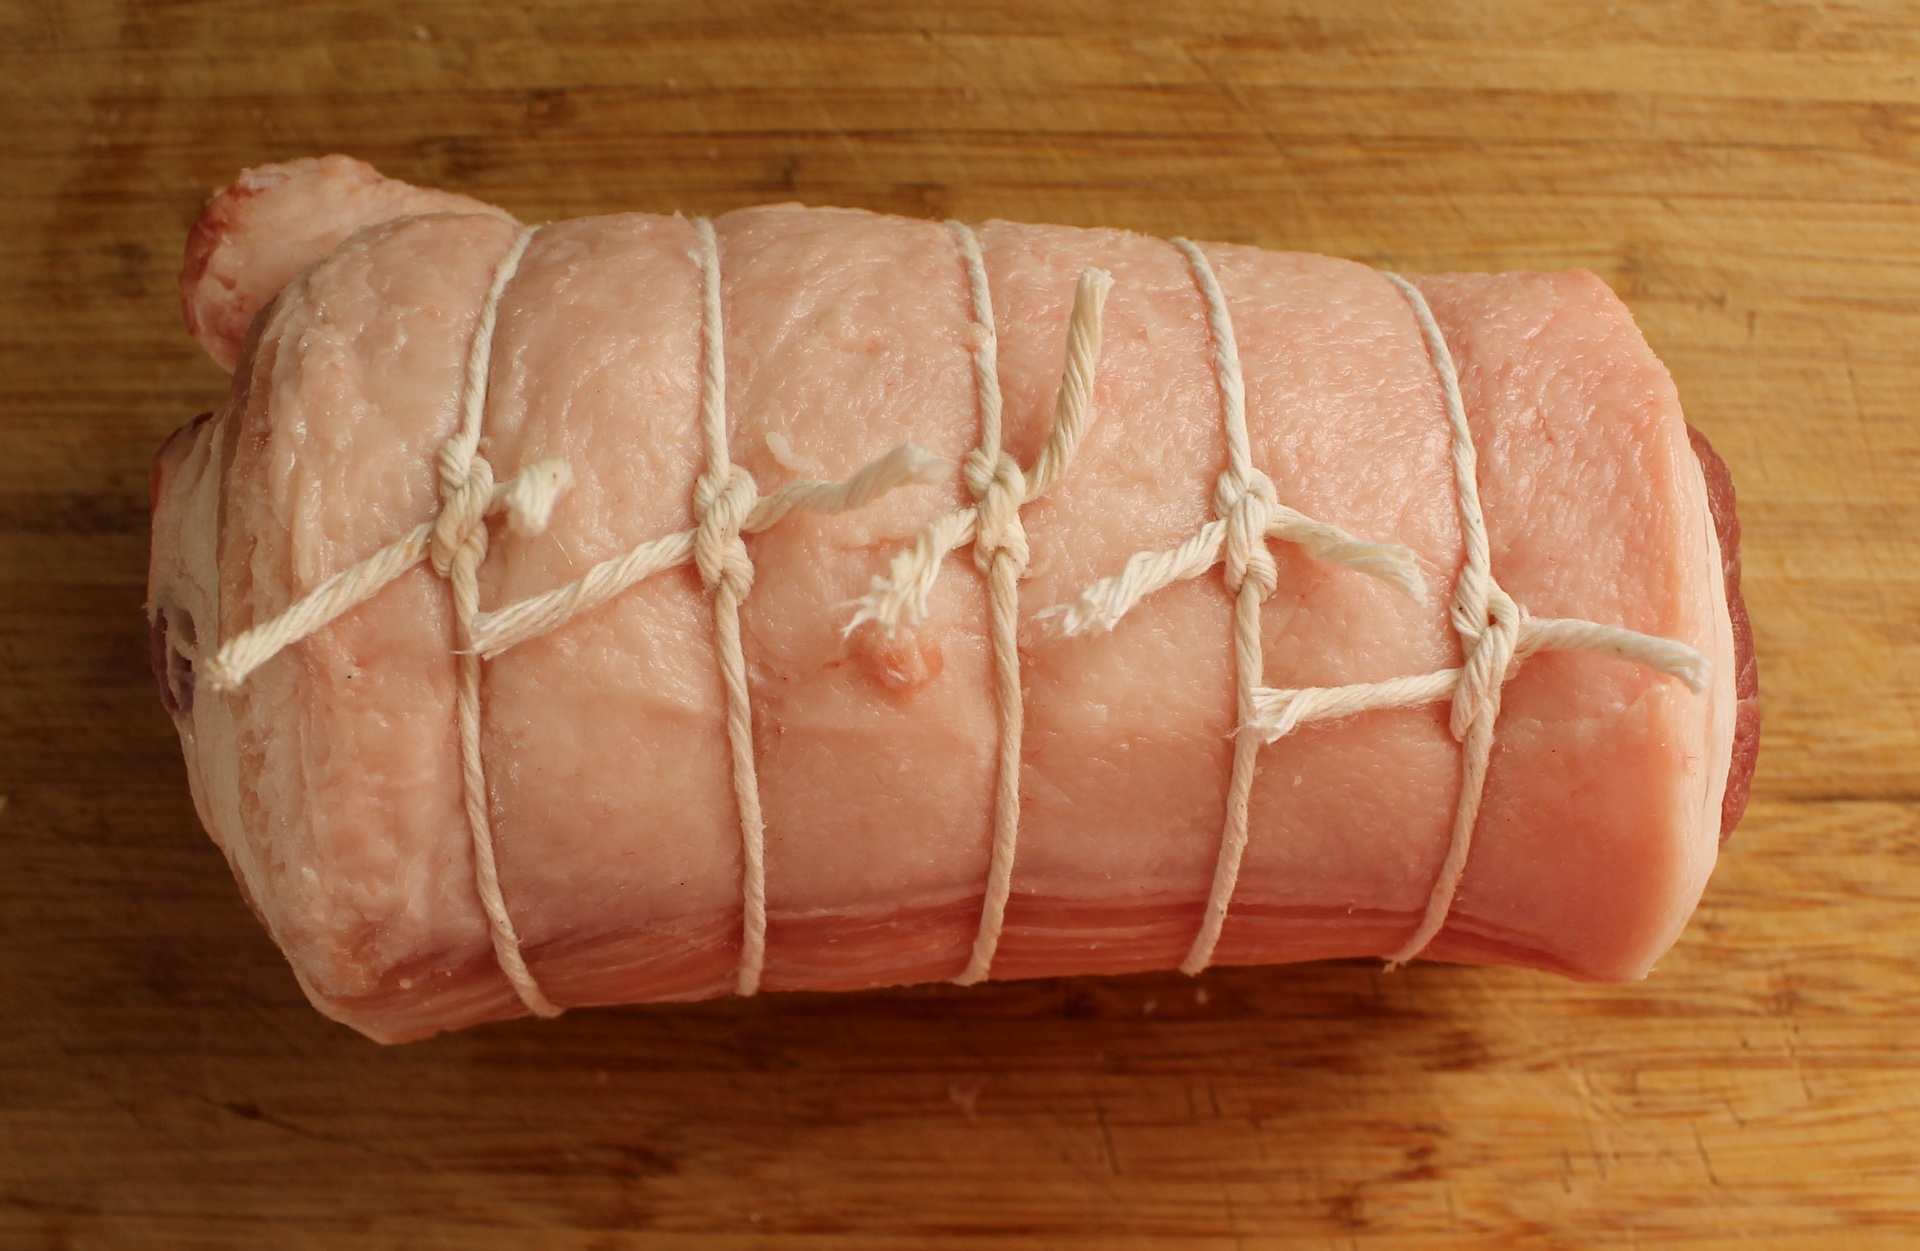  Roll the pork belly into a tight cylinder and then tie it at 1-inch intervals.